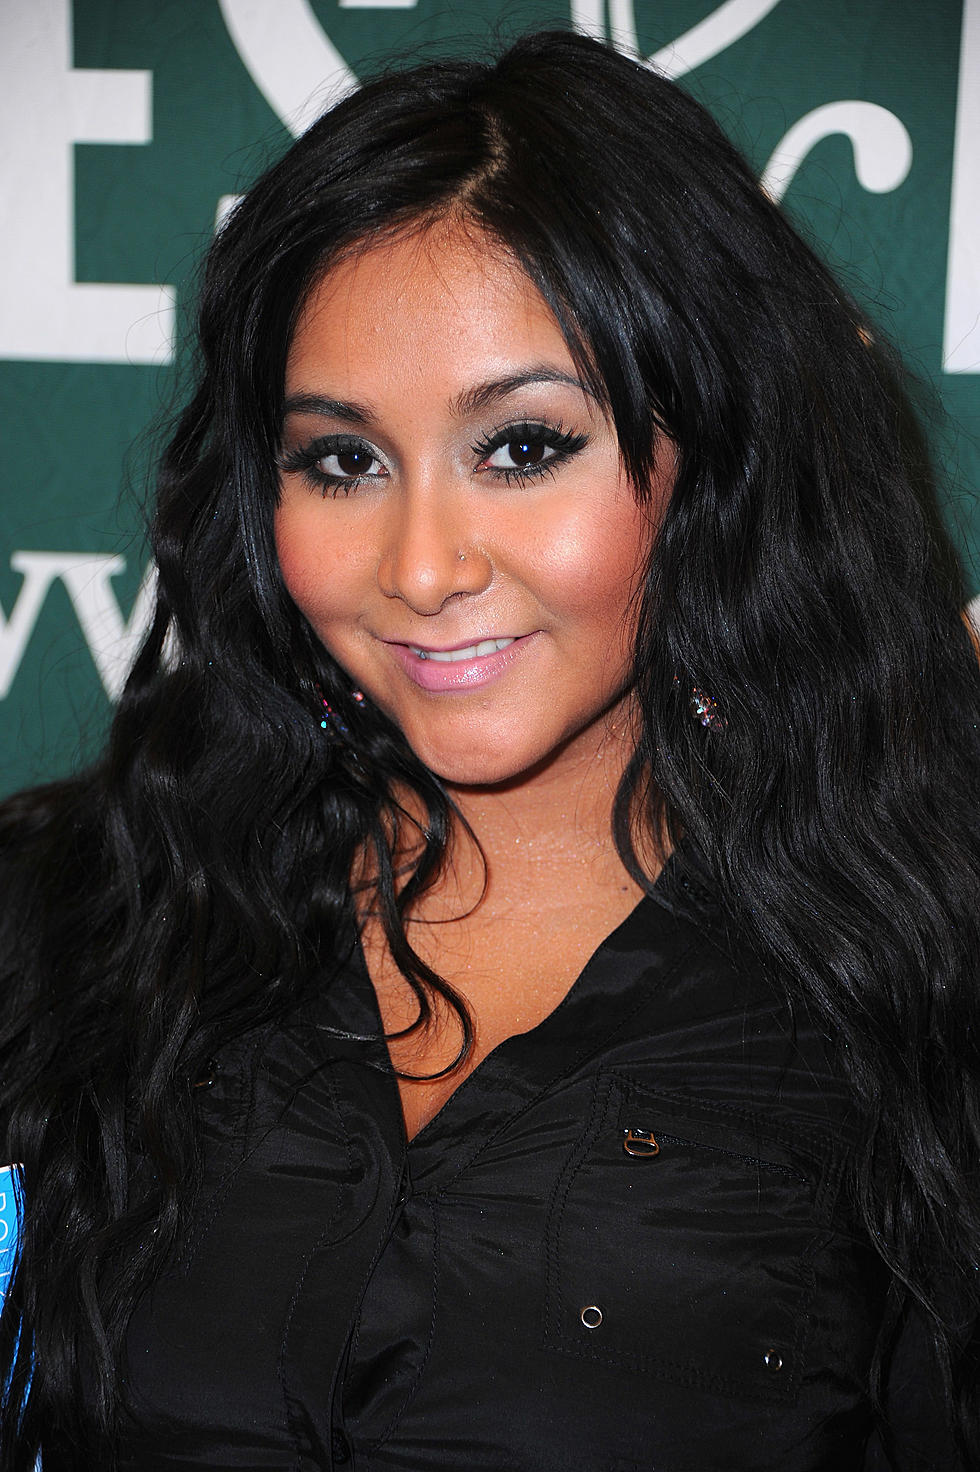 Snooki Says She’s Ready To Be Nicole Again